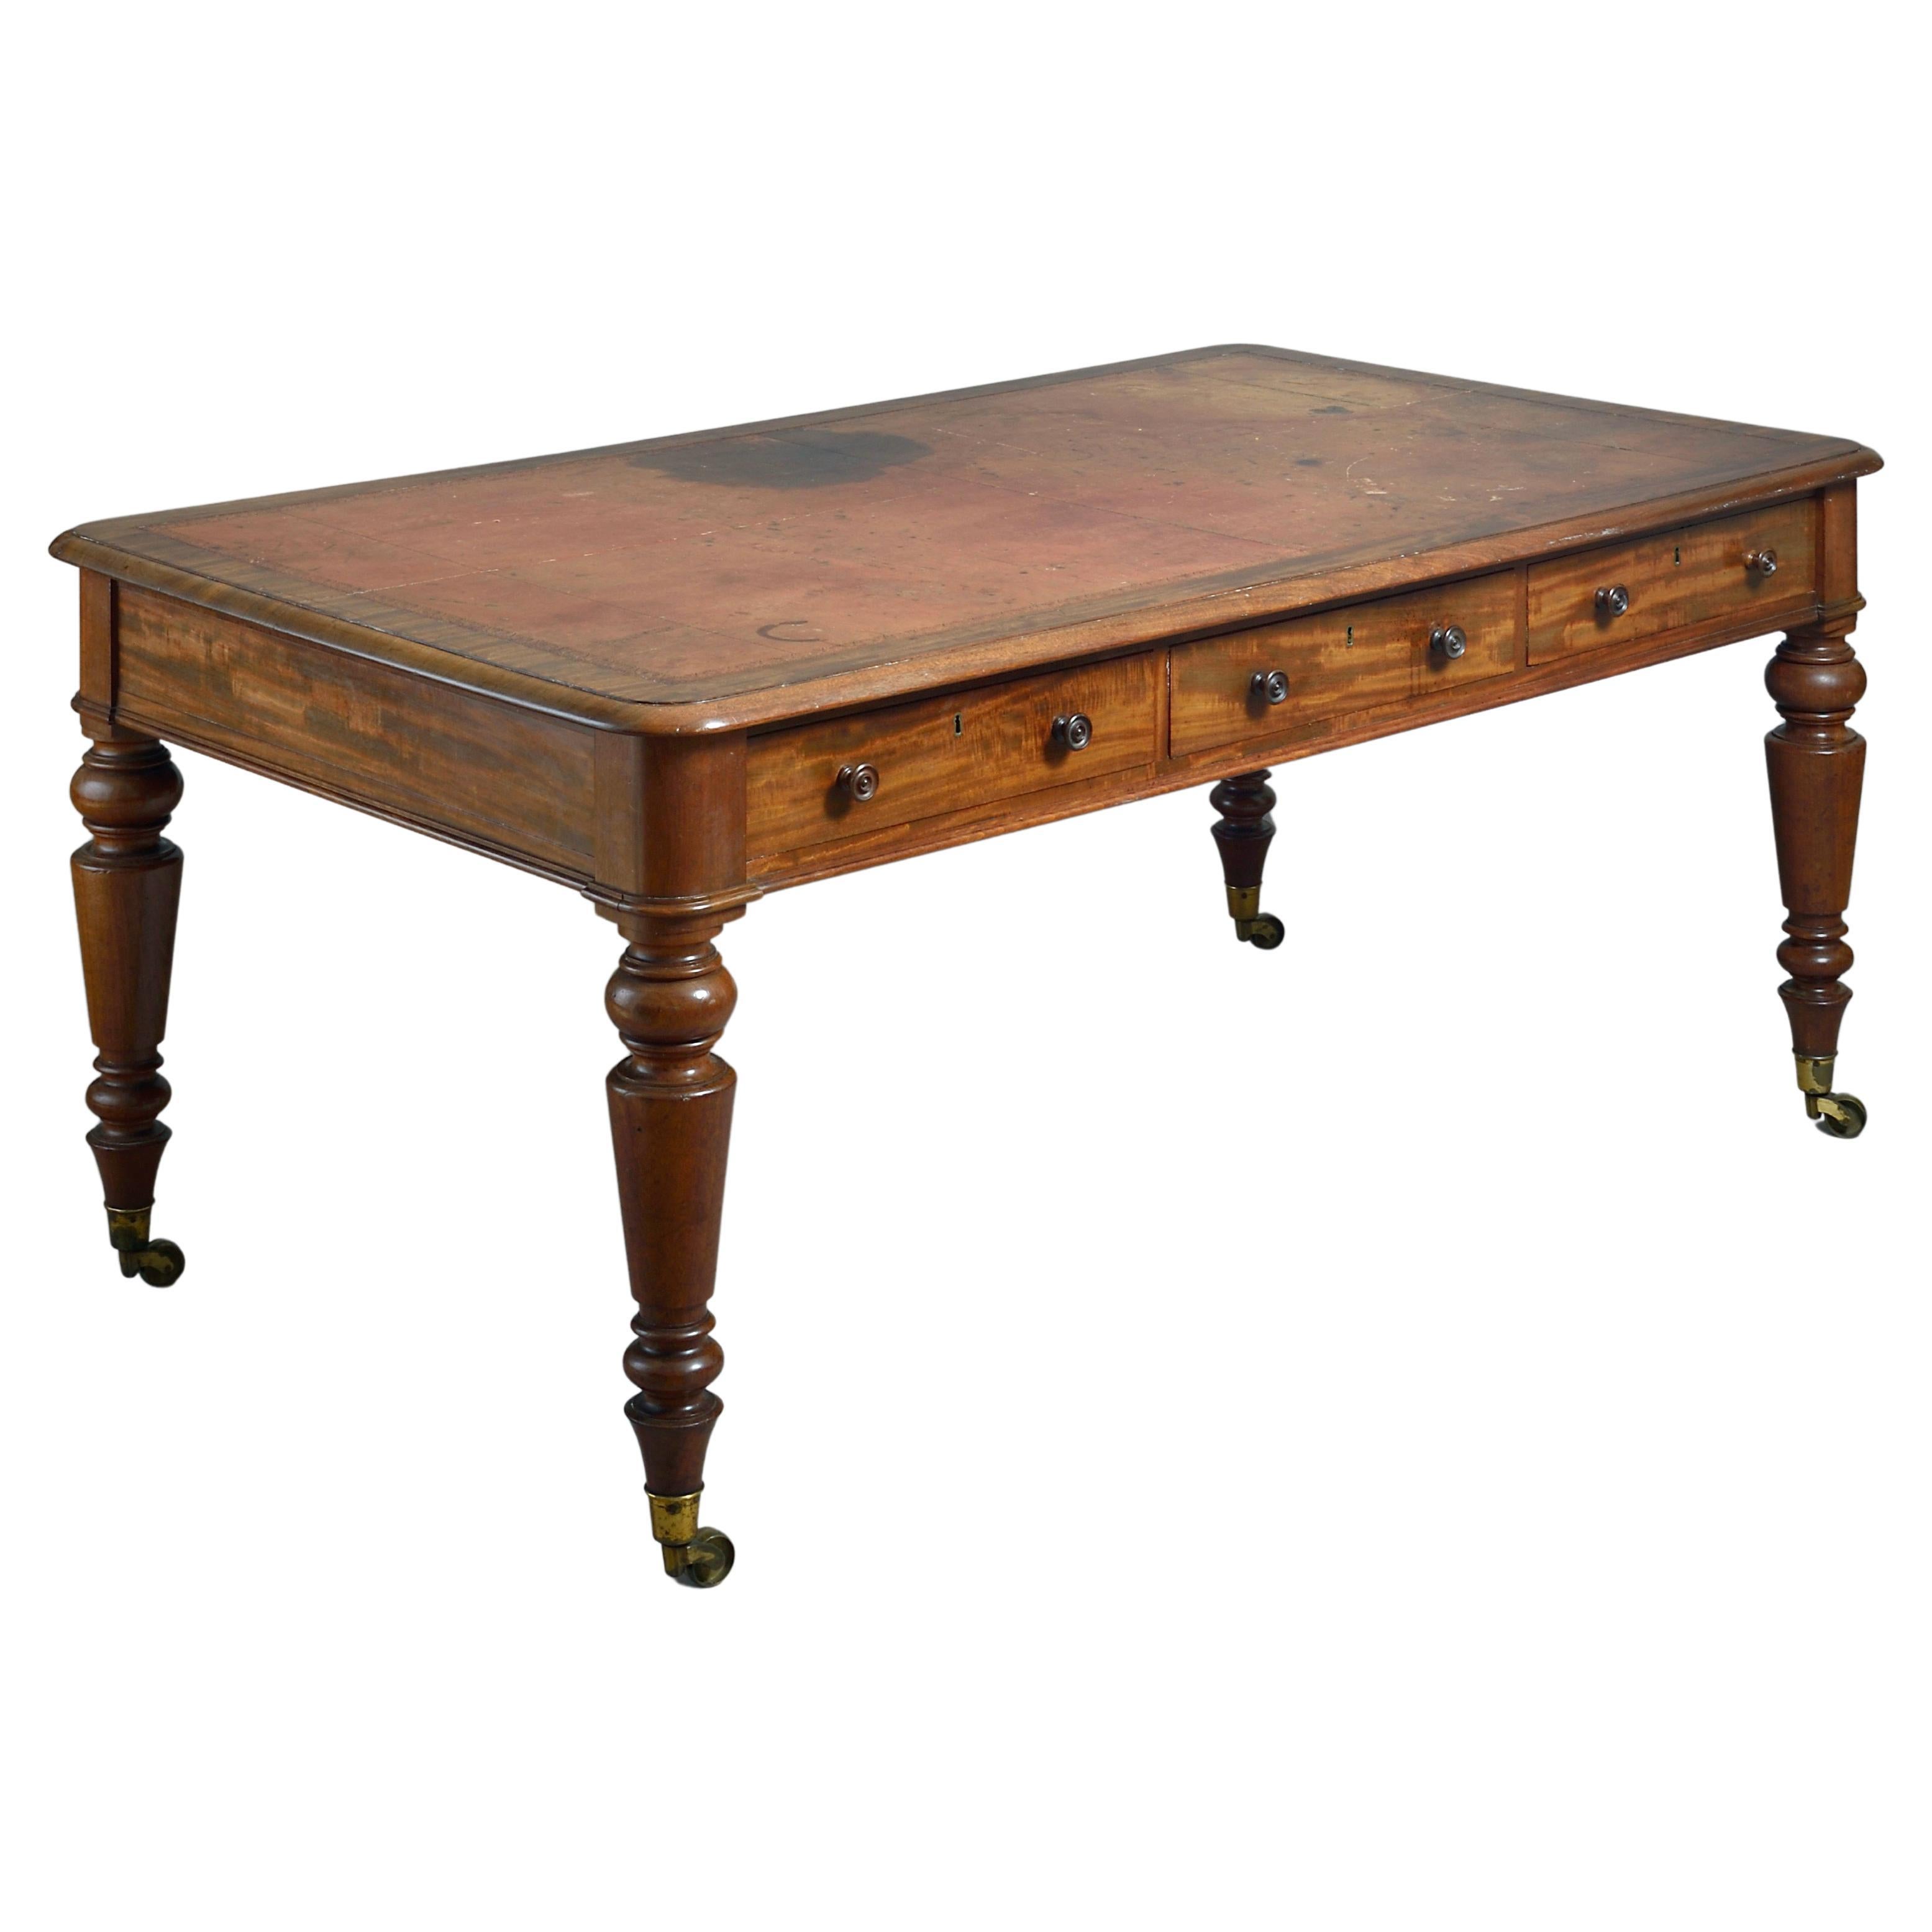 Regency Mahogany Library Table Attributed to Gillows